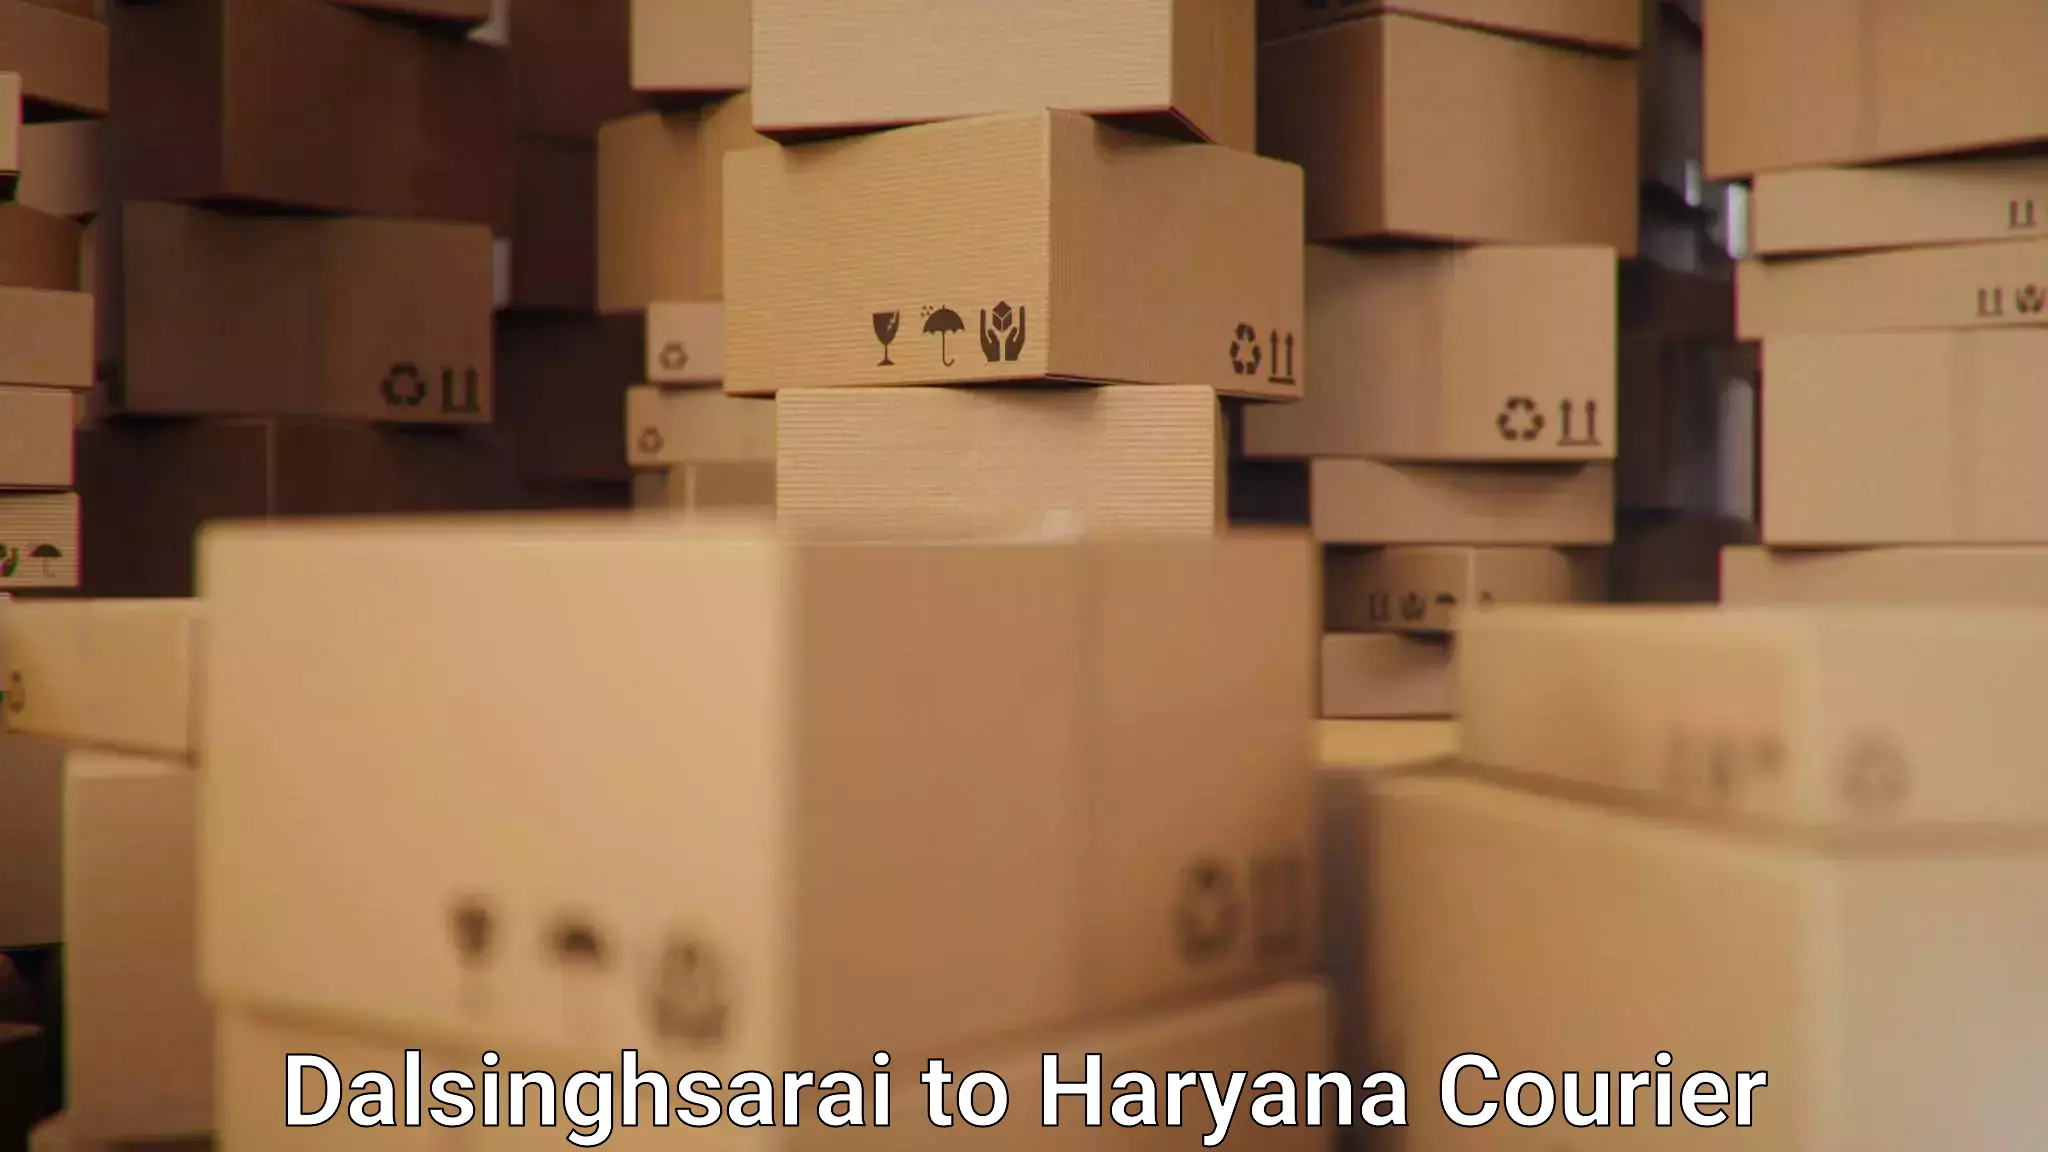 Professional courier services Dalsinghsarai to Haryana